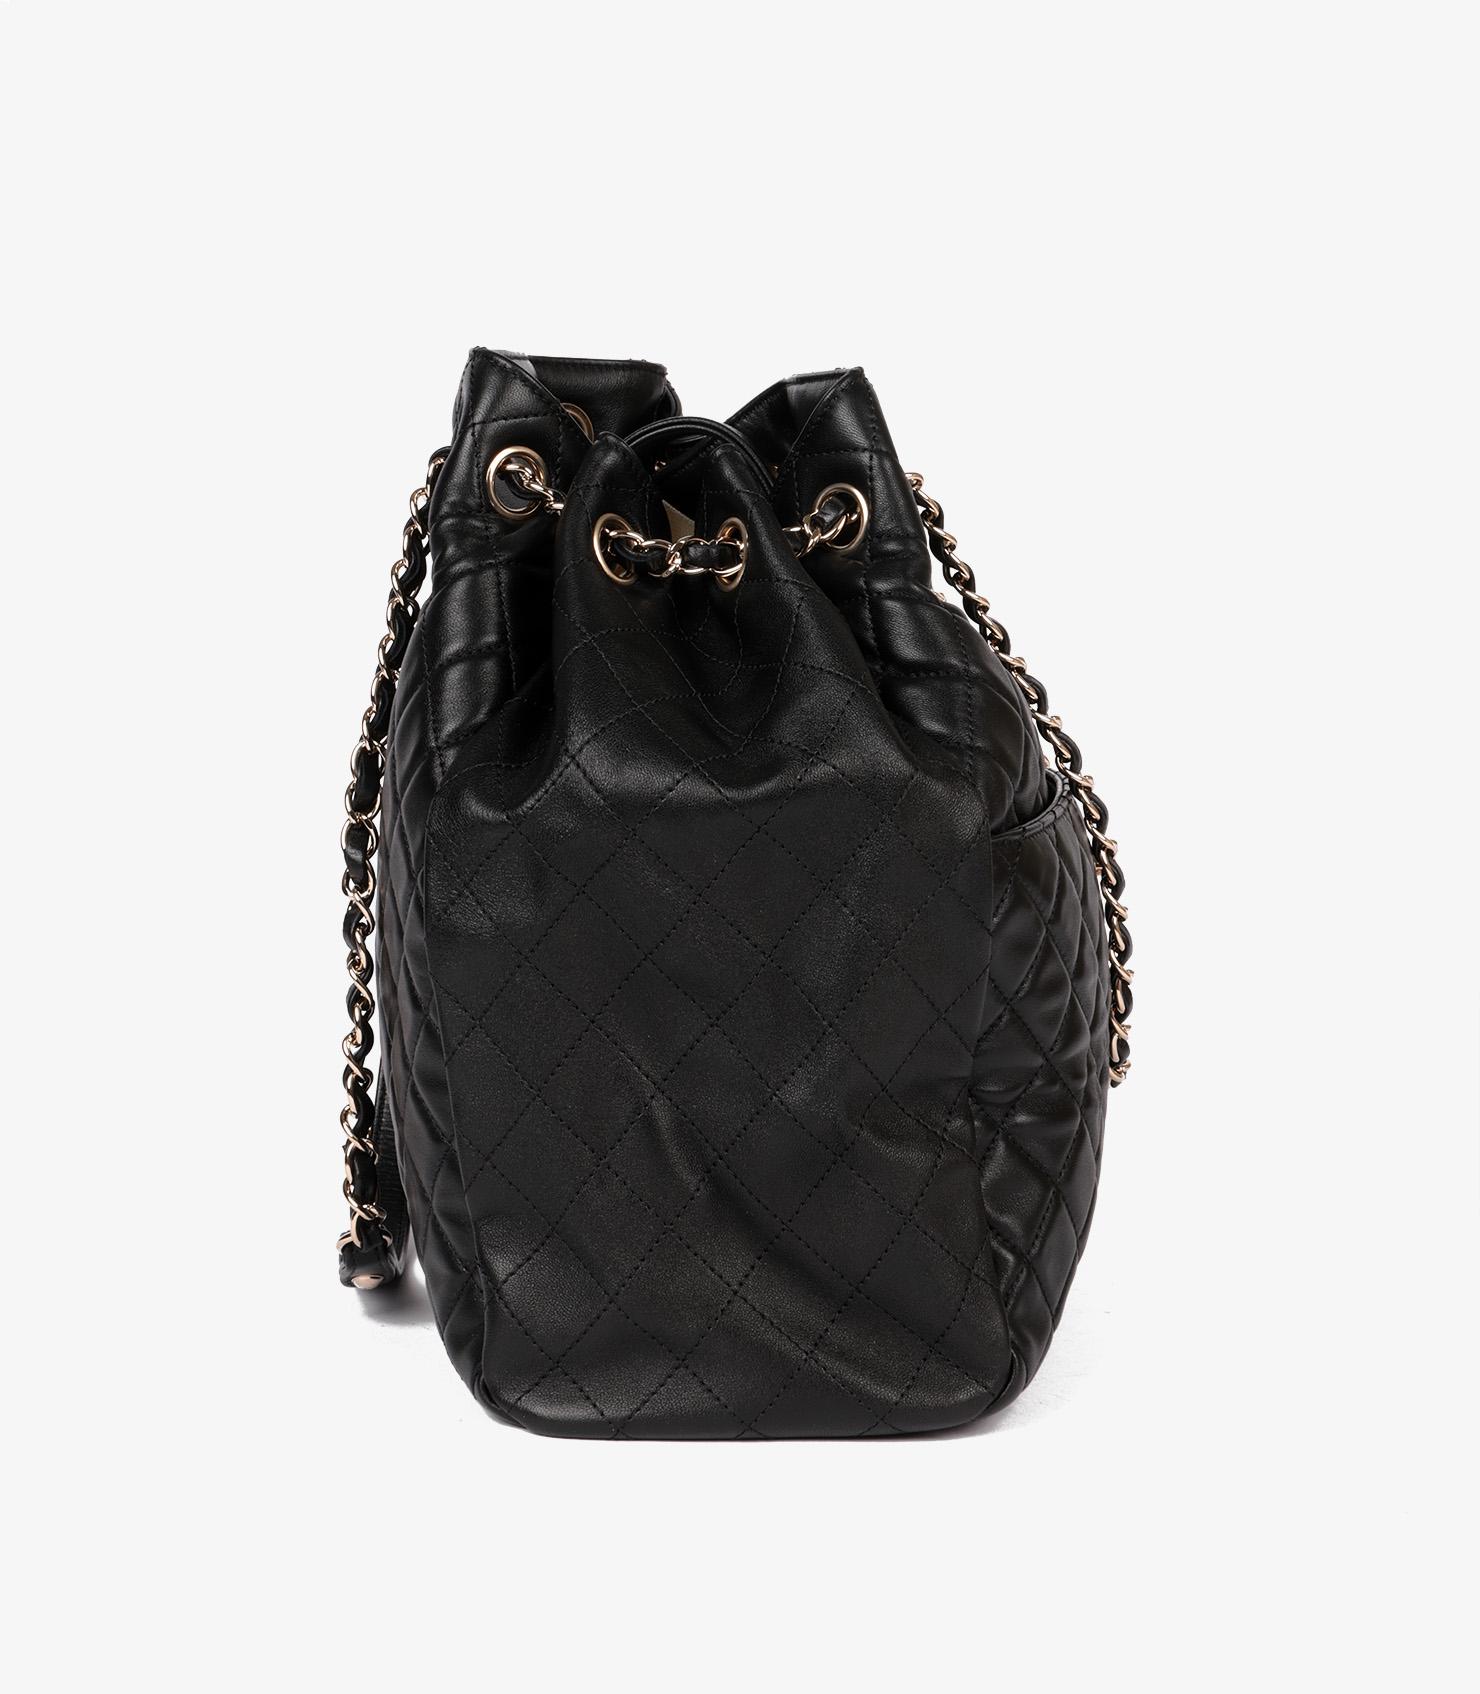 Chanel Black Quilted Lambskin Large Classic Bucket Bag In Excellent Condition For Sale In Bishop's Stortford, Hertfordshire